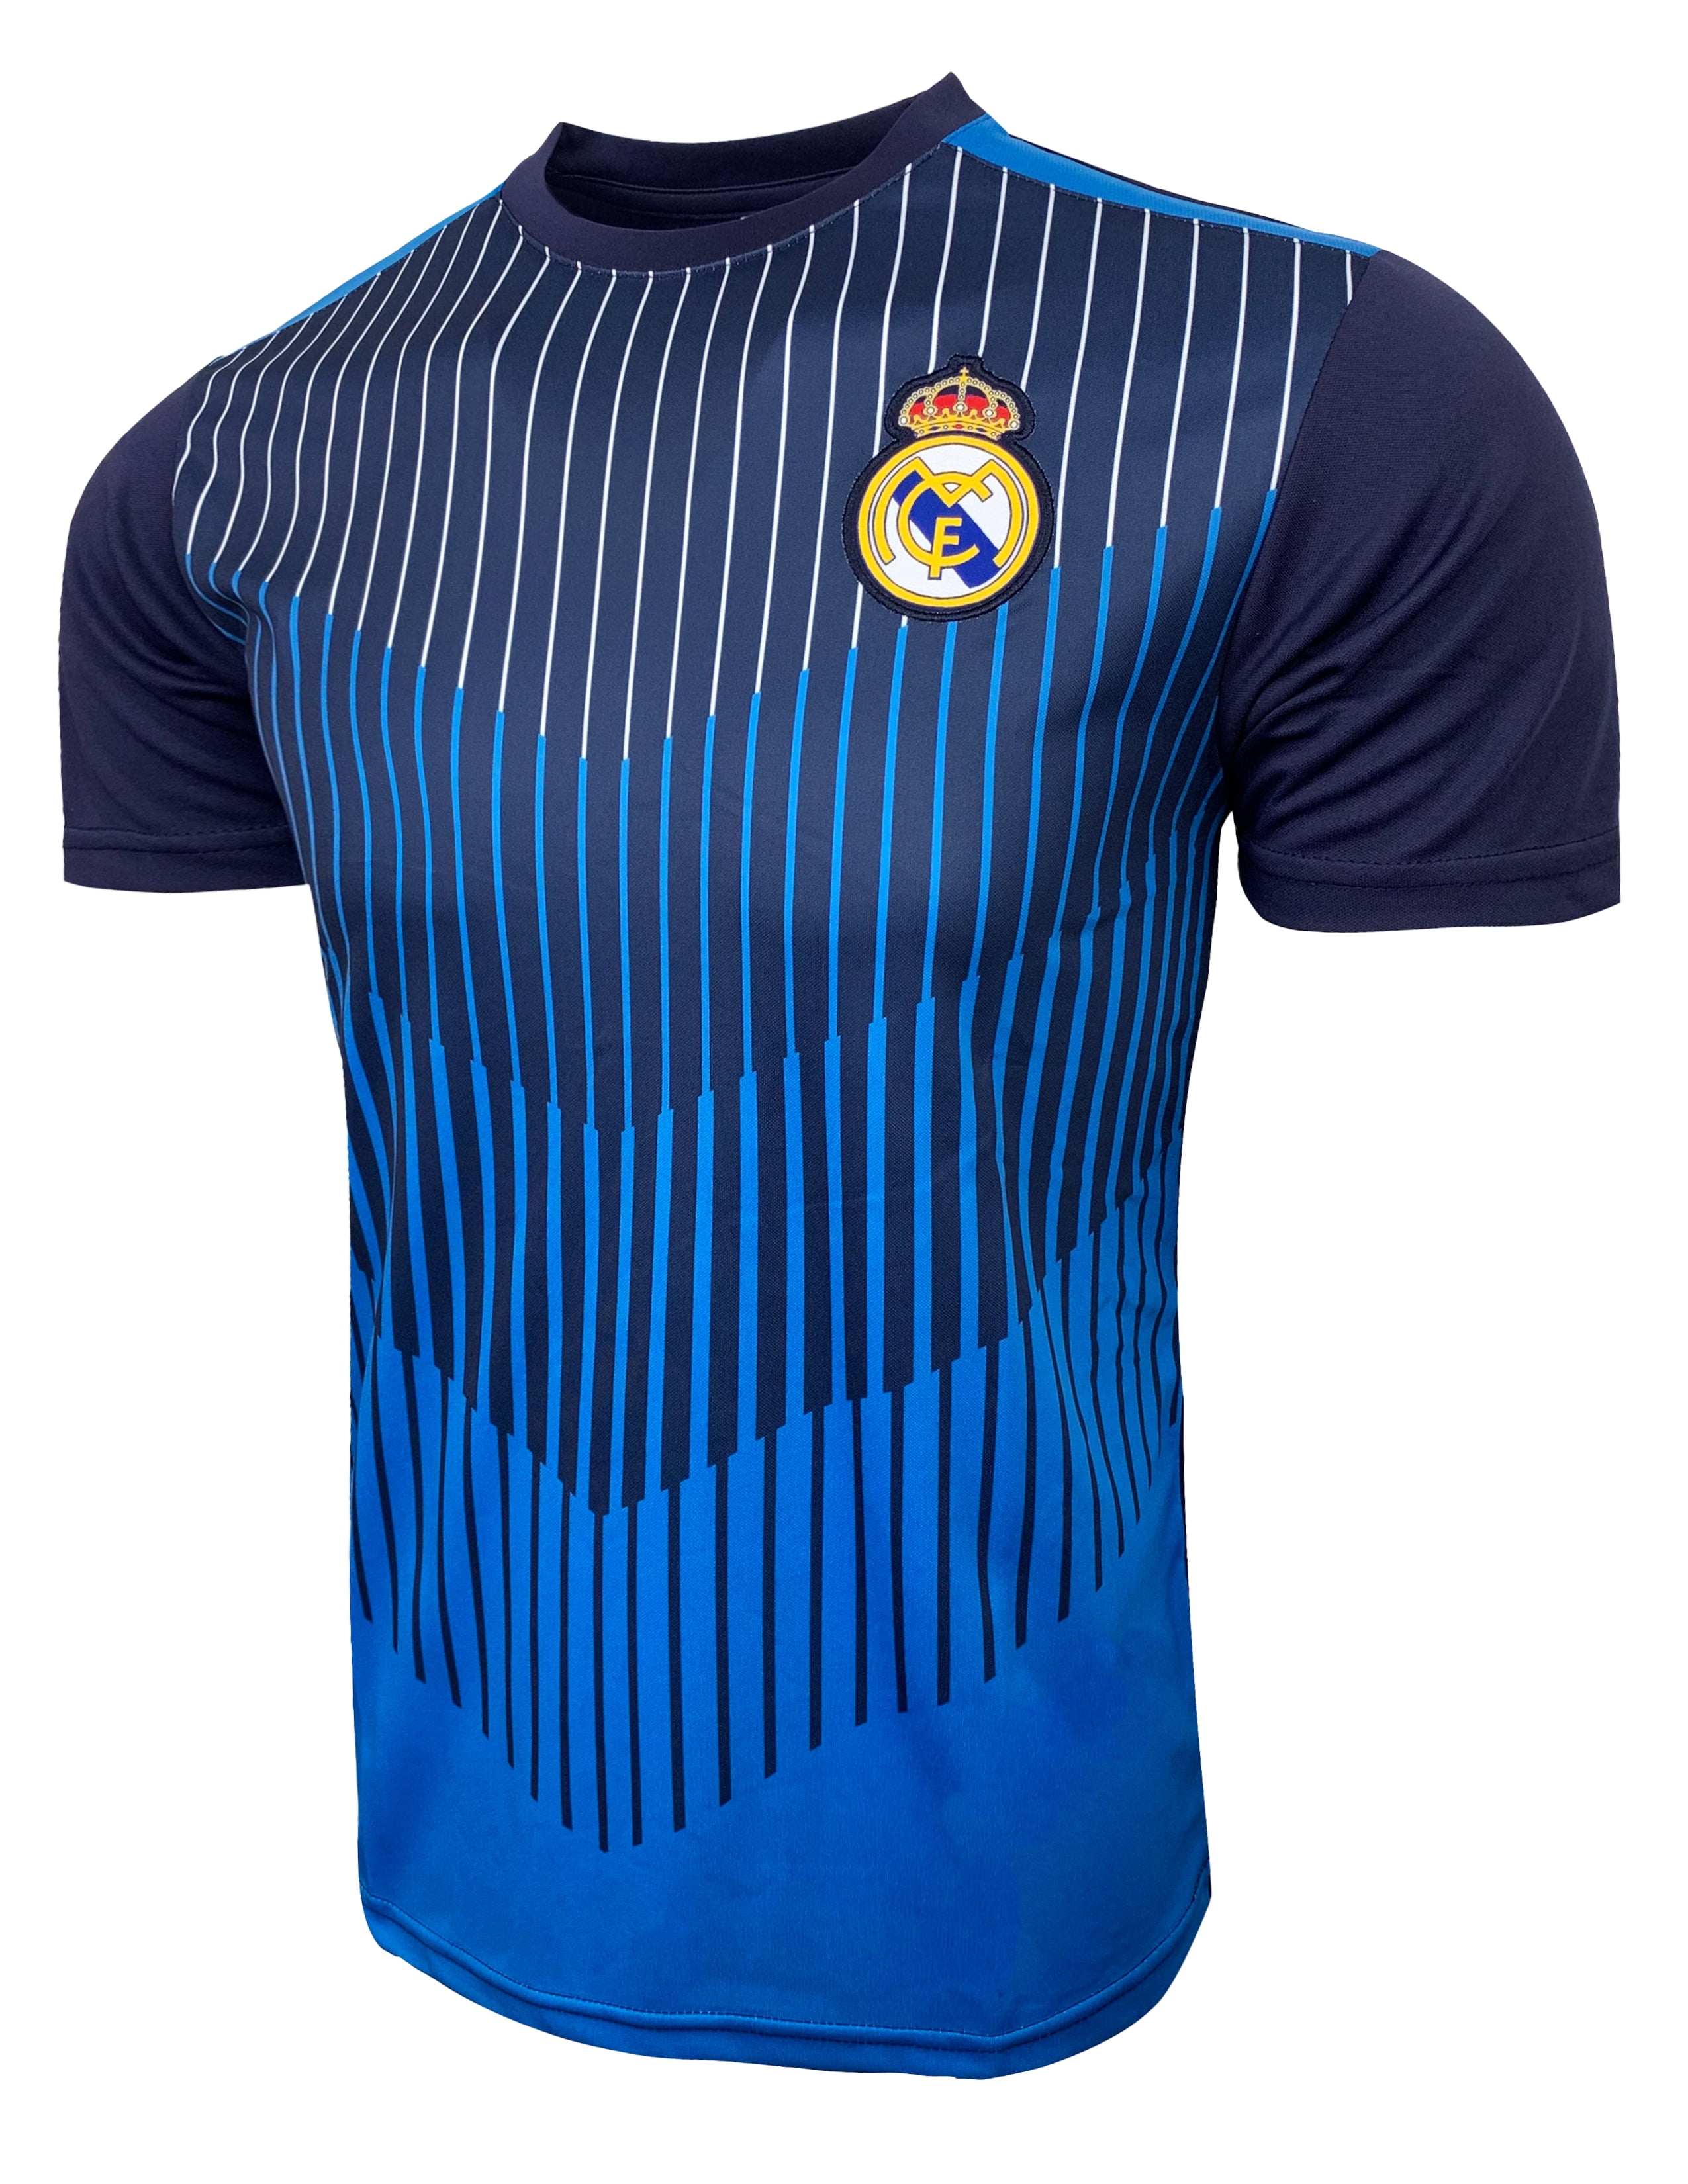 ICON SPORTS Real Madrid Jersey 2019 2020 Soccer Fans Adult Men Blue Training Customize Custom Name 